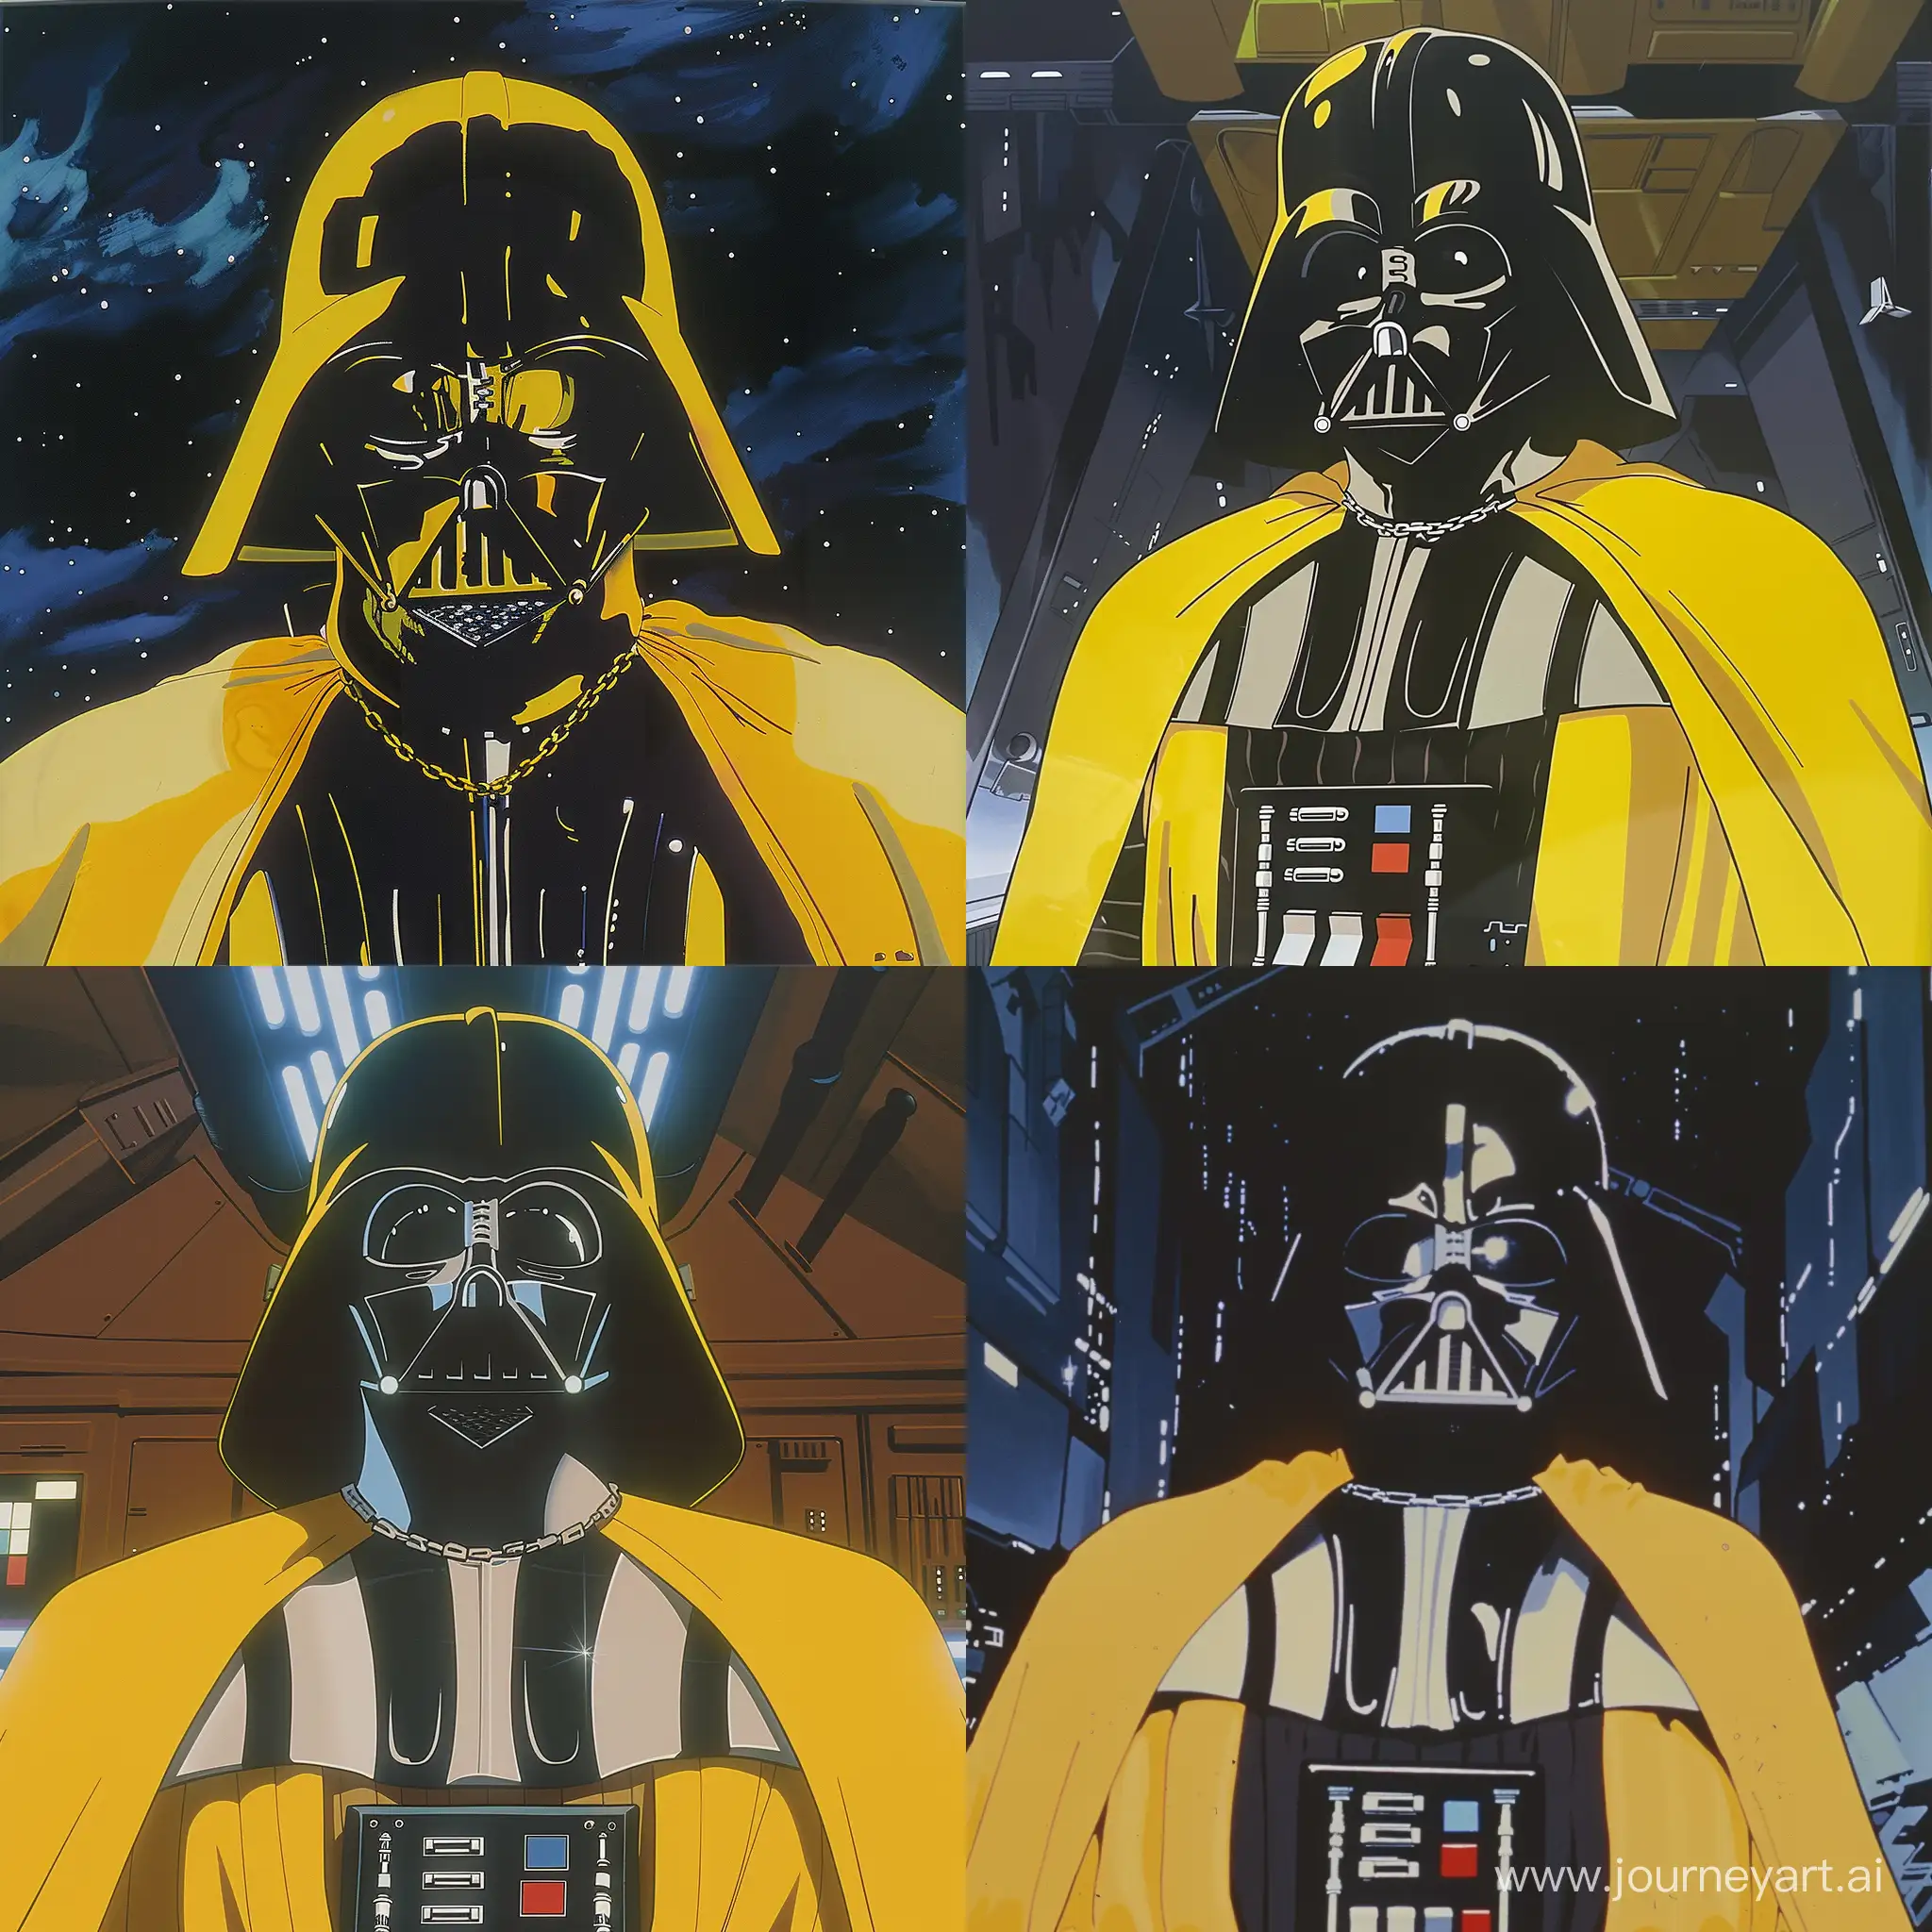 Darth Vader portrait in anime genre film, dvd screenshot from anime film, yellow costume and 80s anime film composition